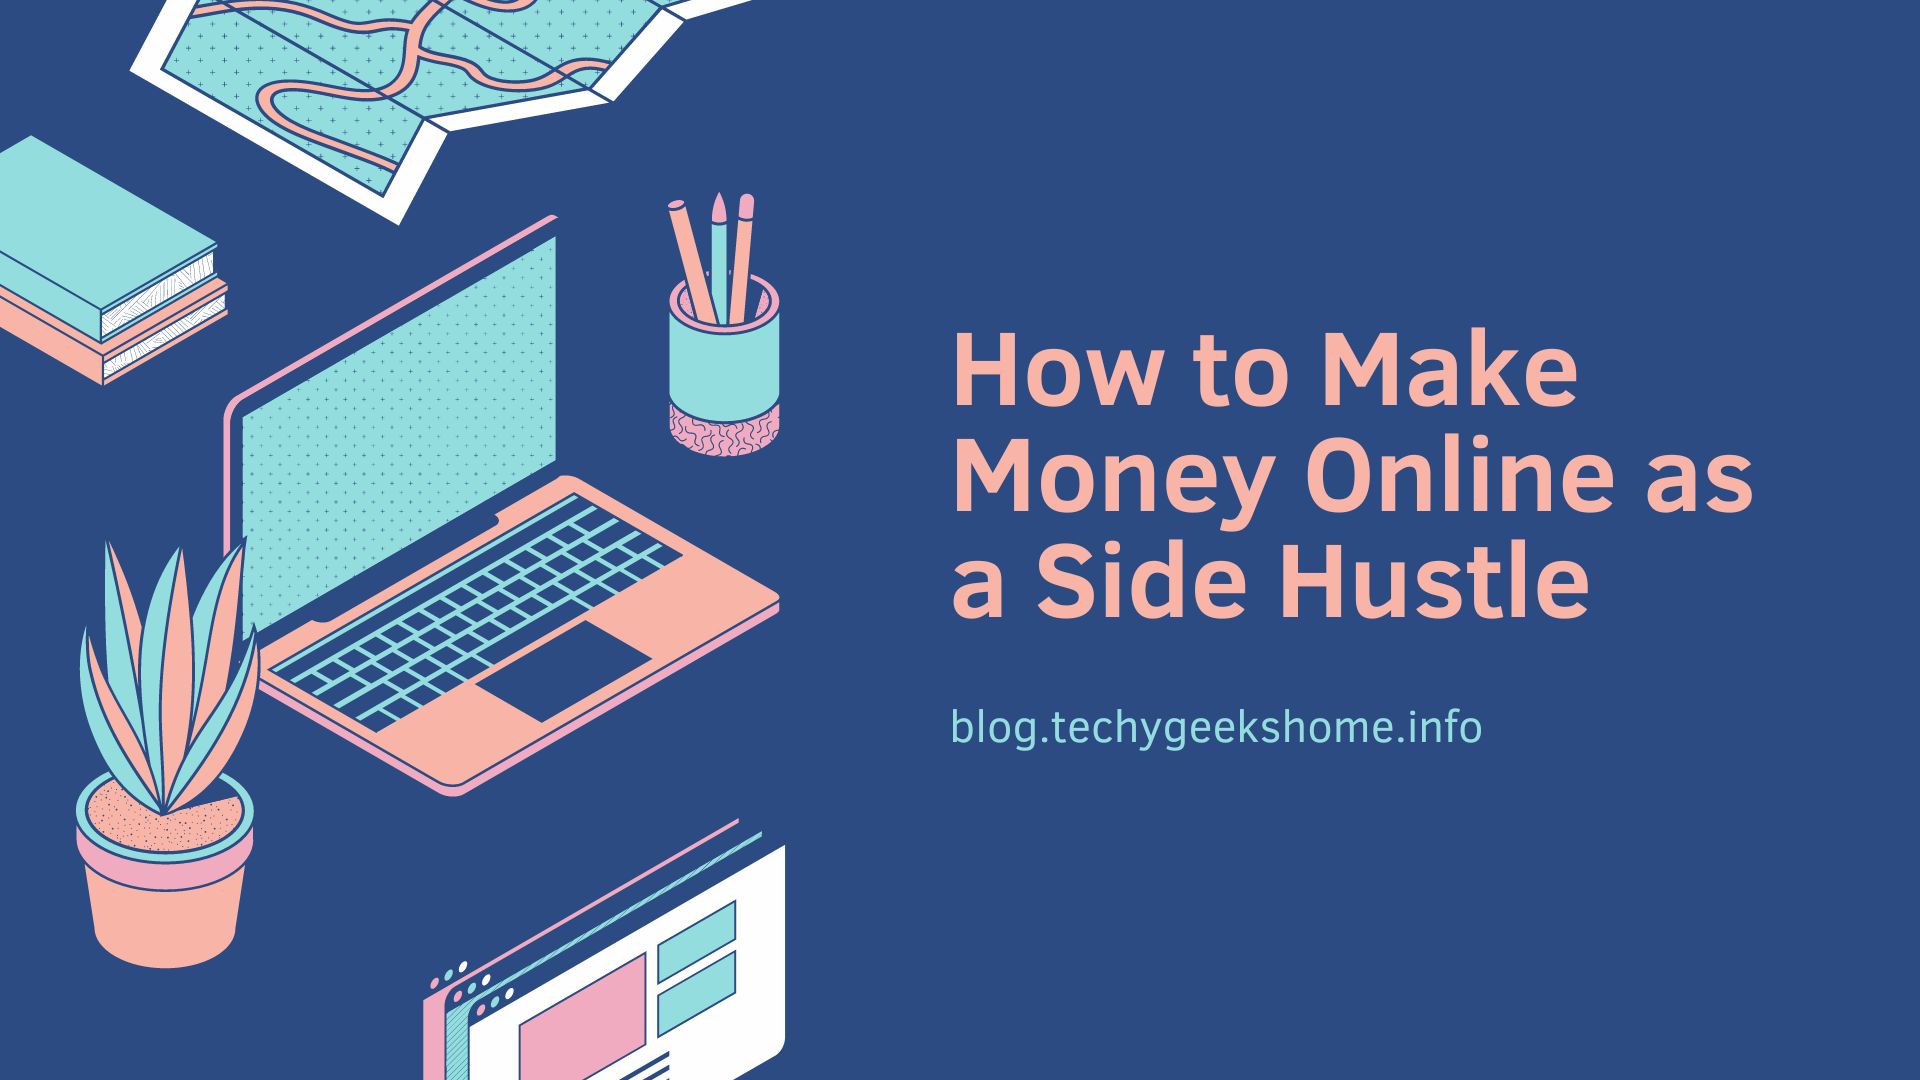 How to Make Money Online as a Side Hustle